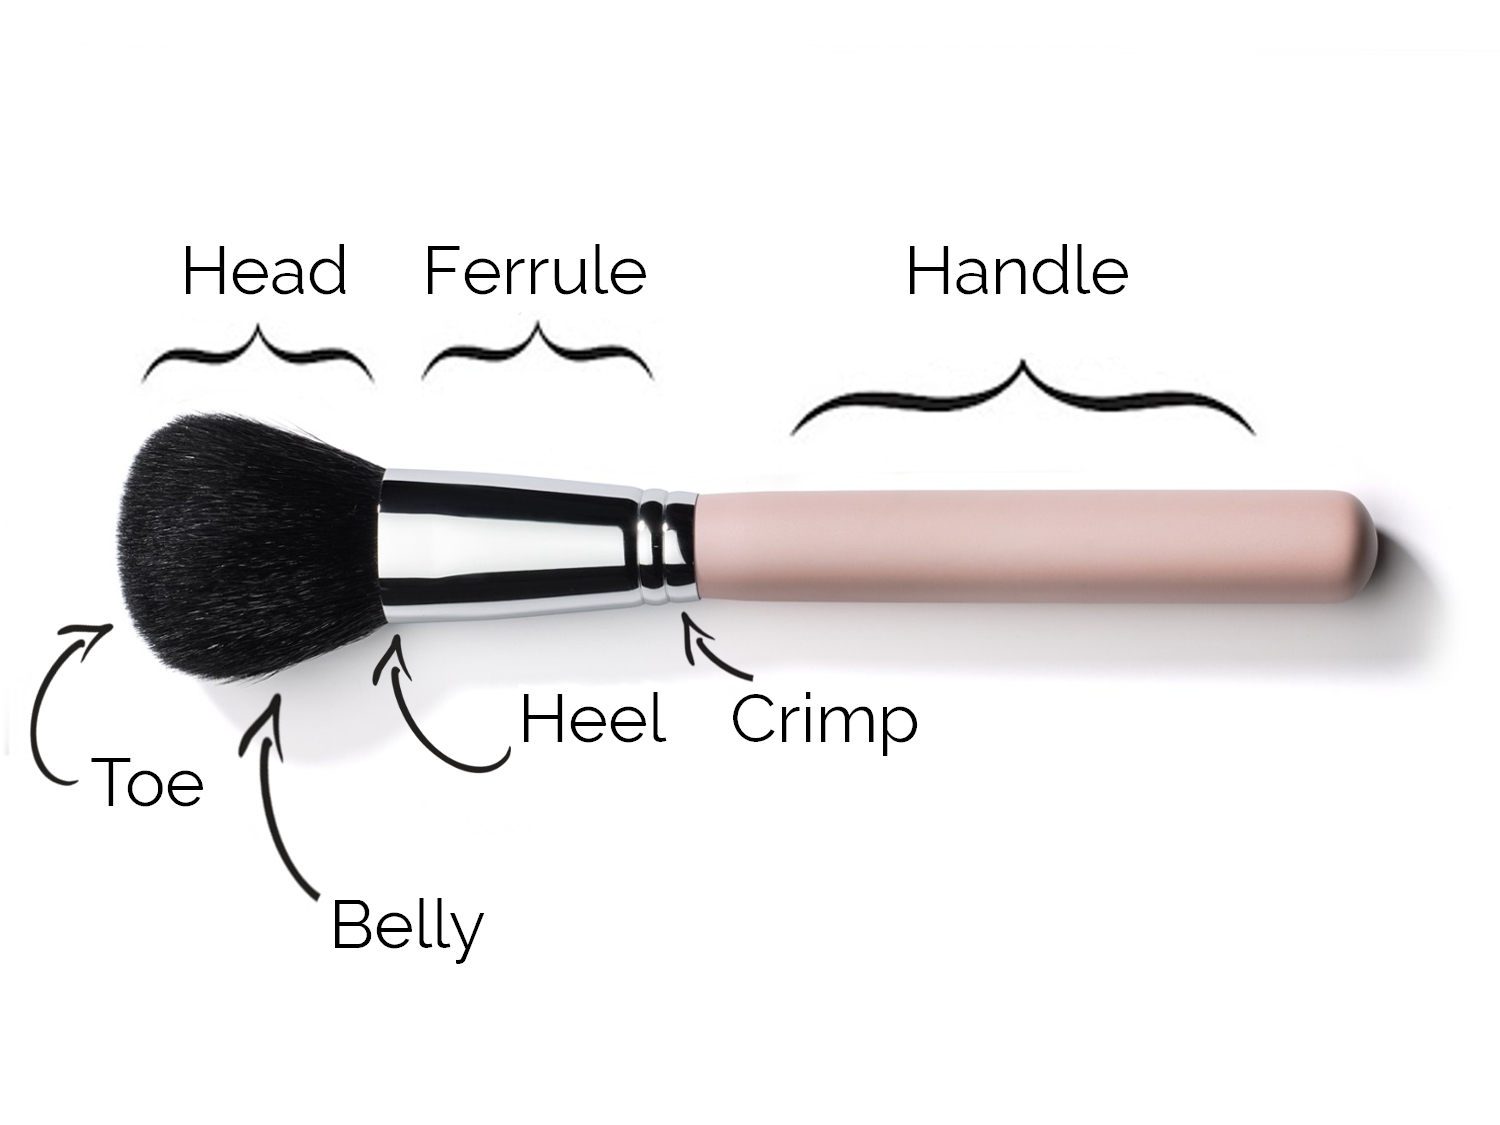 Parts of a brush